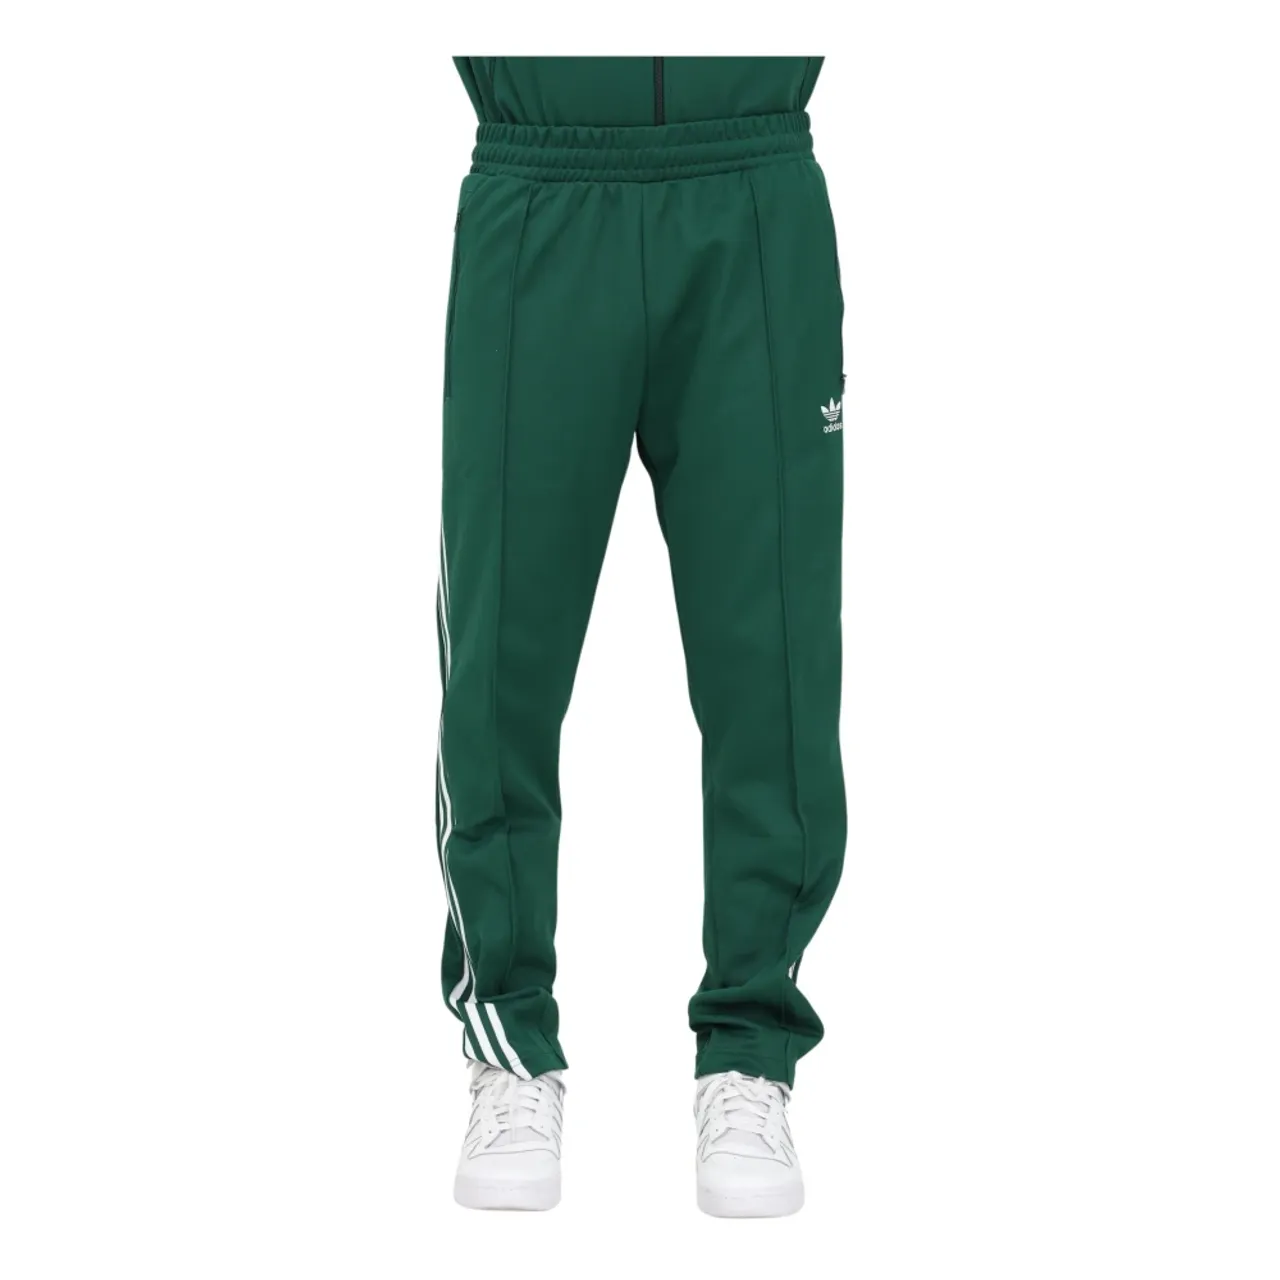 Adidas - Trousers 